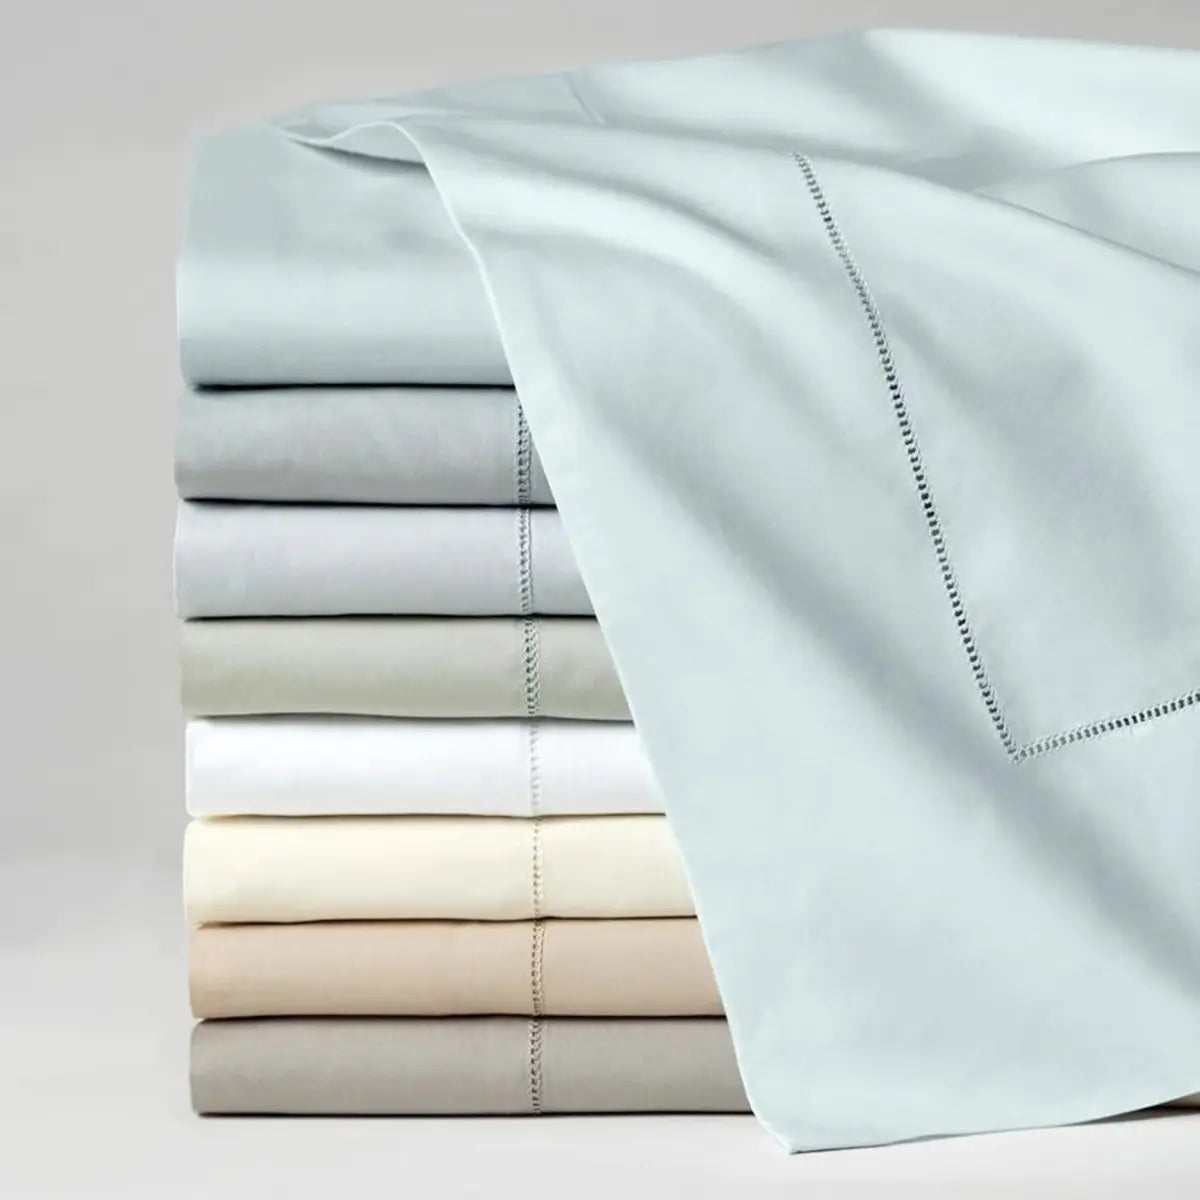 Celeste Flat Sheet in various colors stacked together